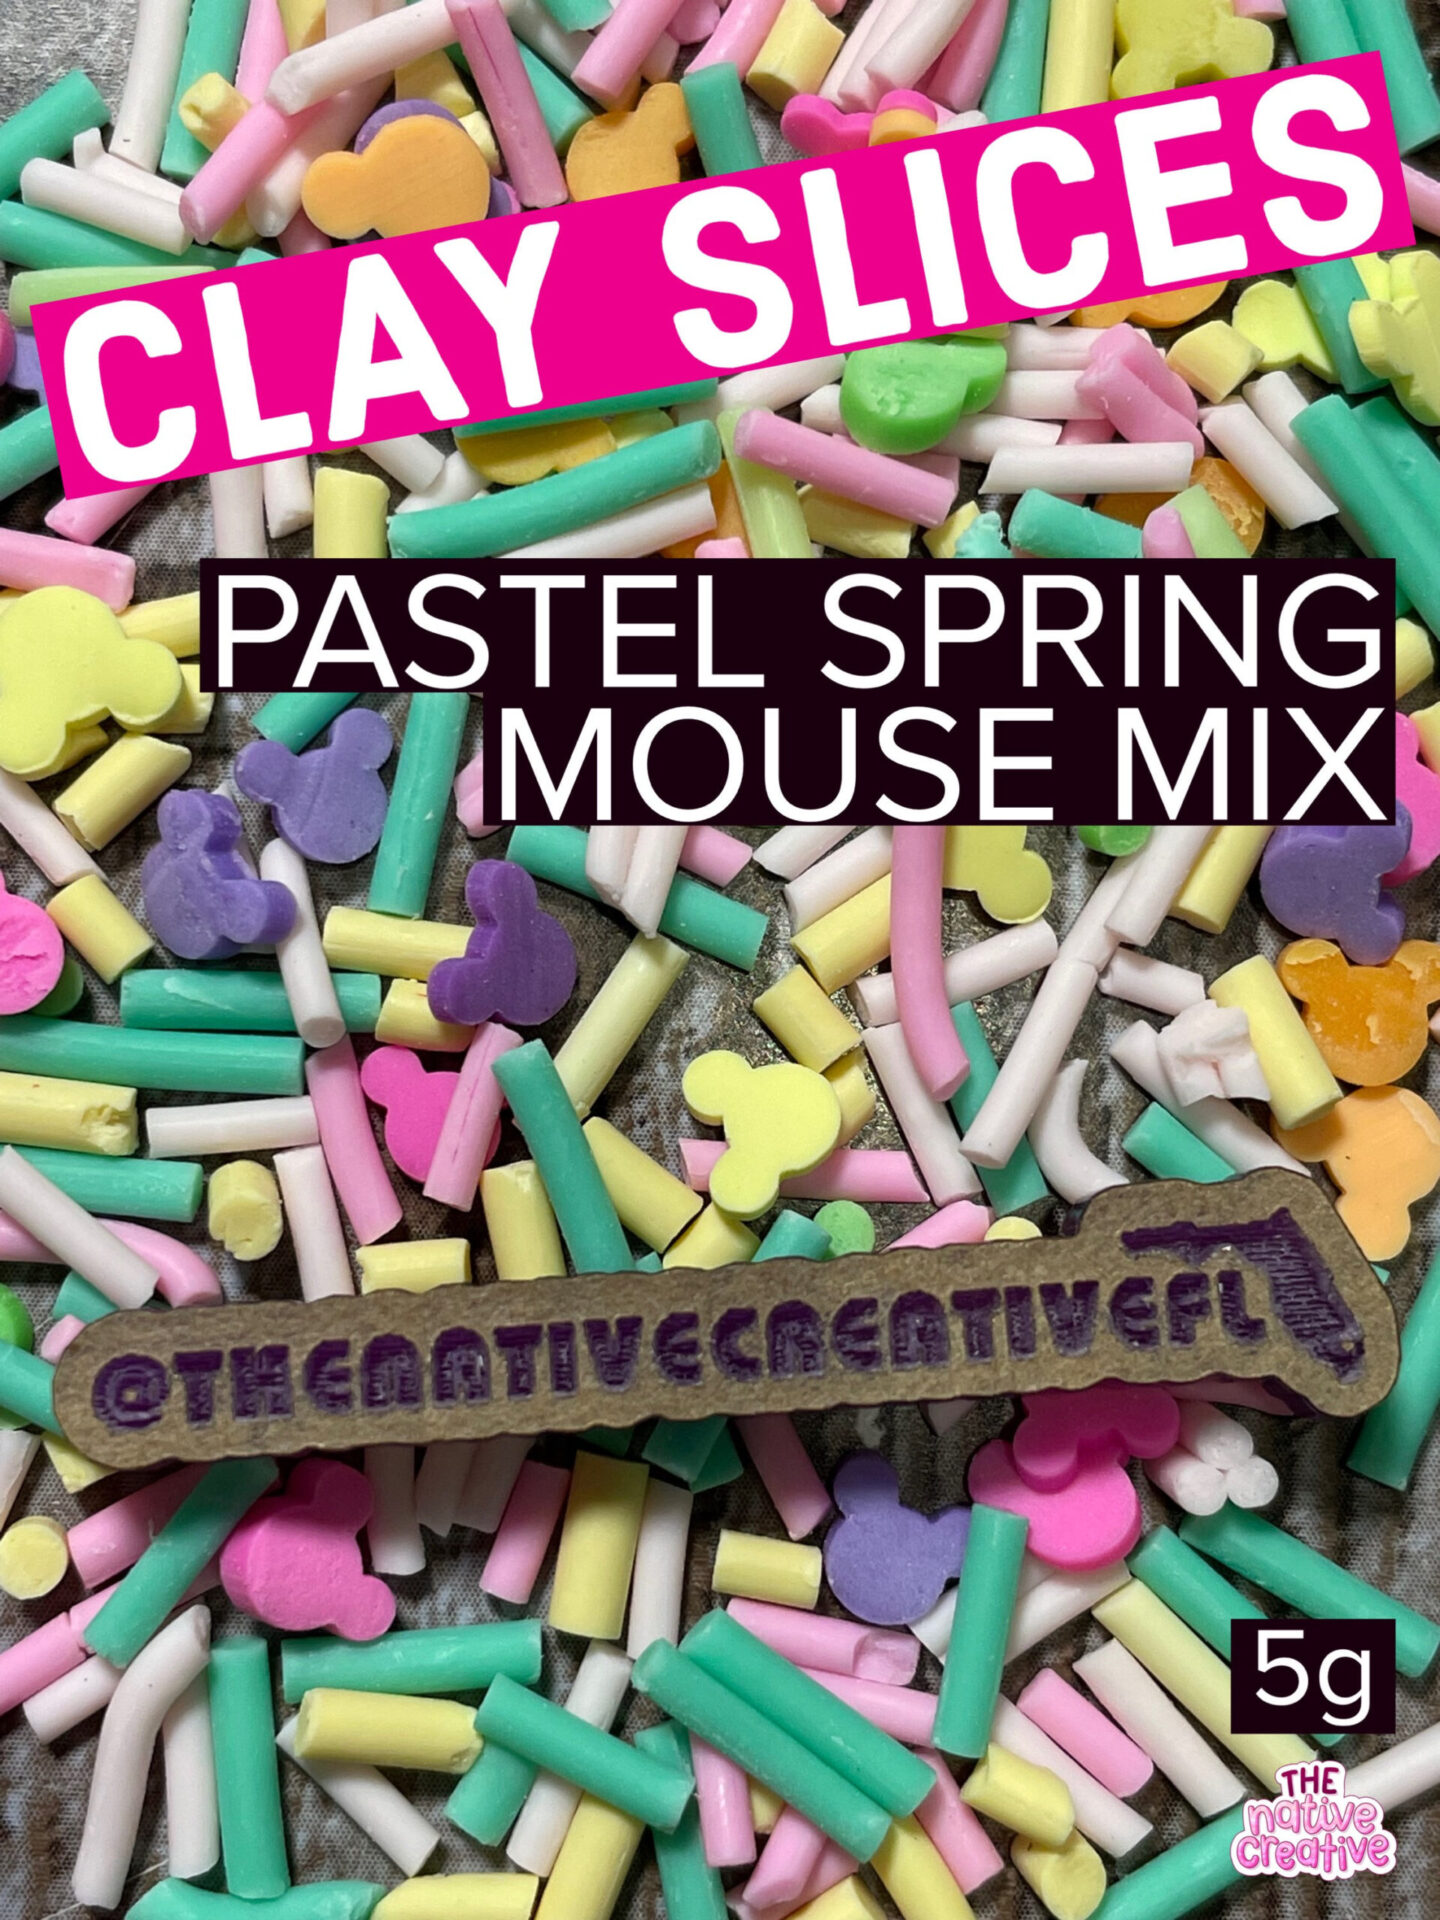 Roomies Mix Clay Slices 5g * EXCLUSIVE MIX * Supplies - The Native Creative